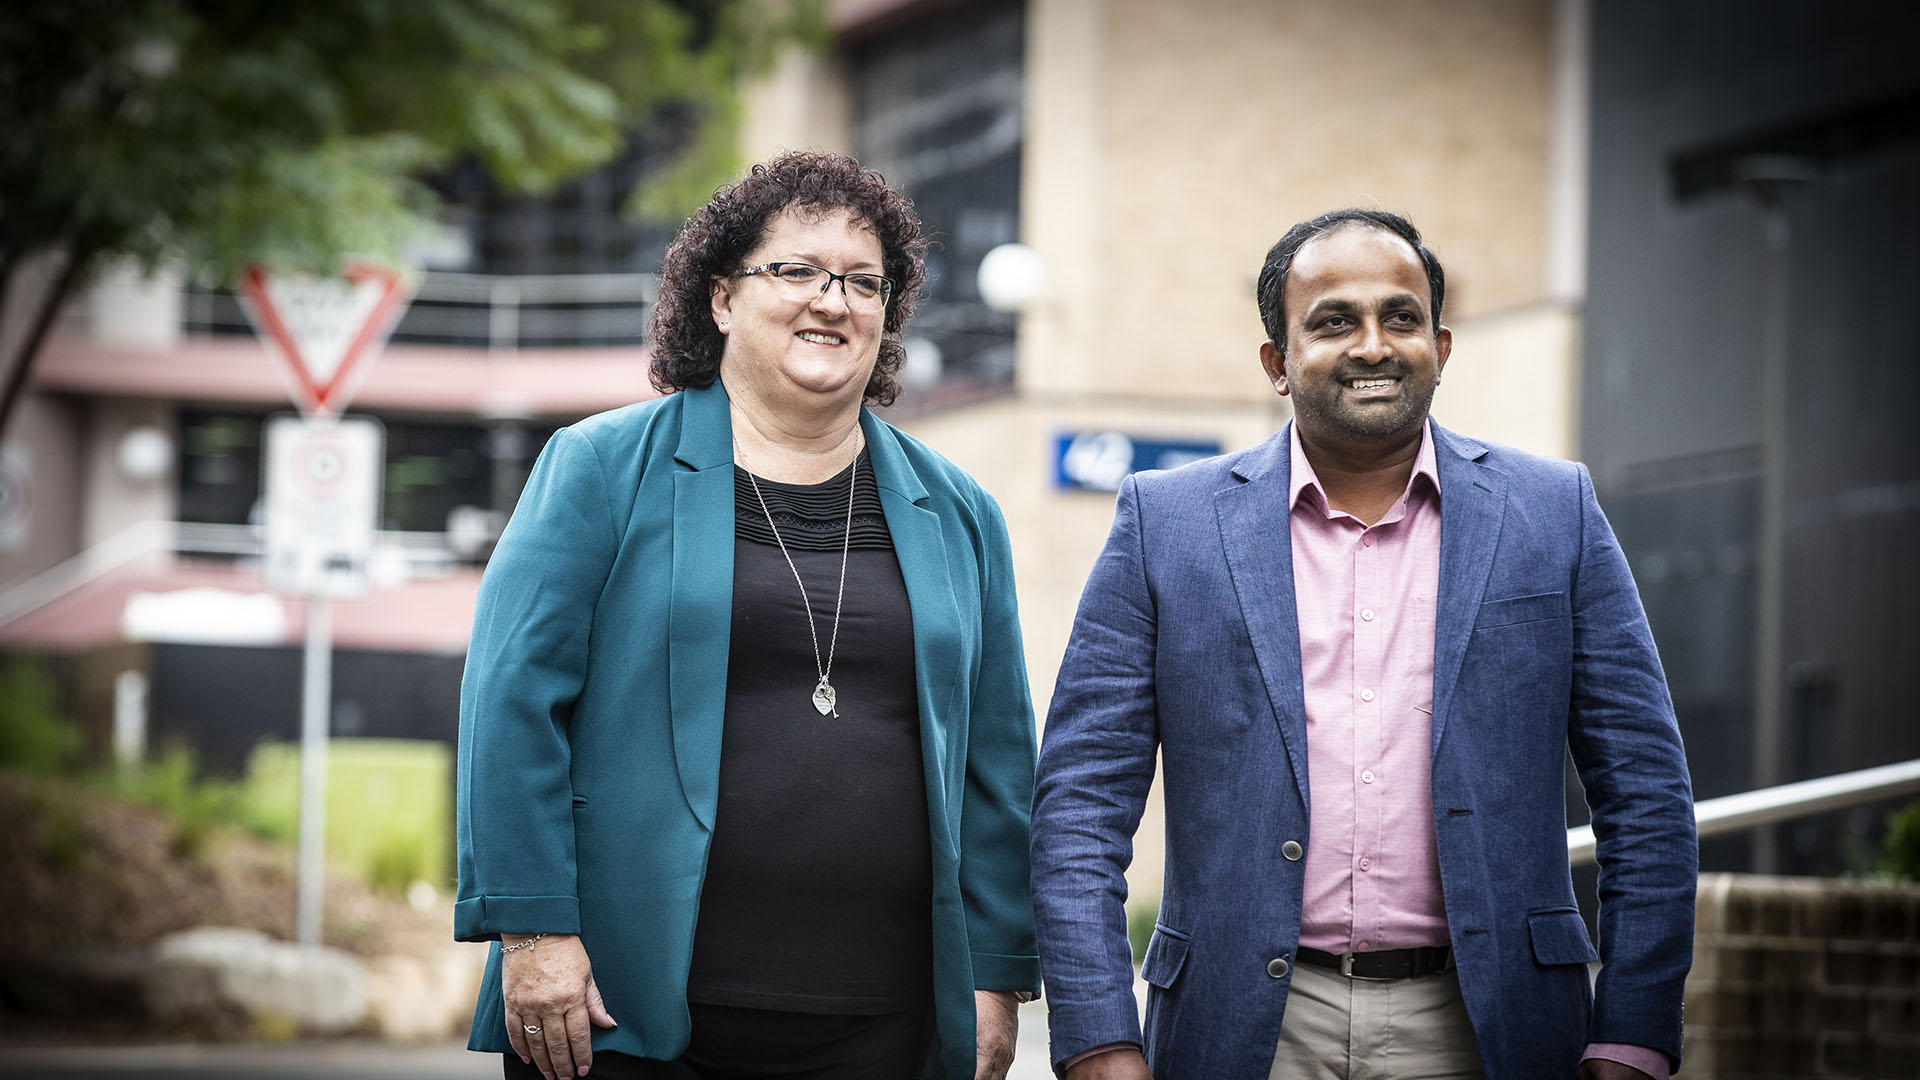 SMART Infrastructure Facility COO Tania Brown and researcher Dr Rohan Wickramasuriya